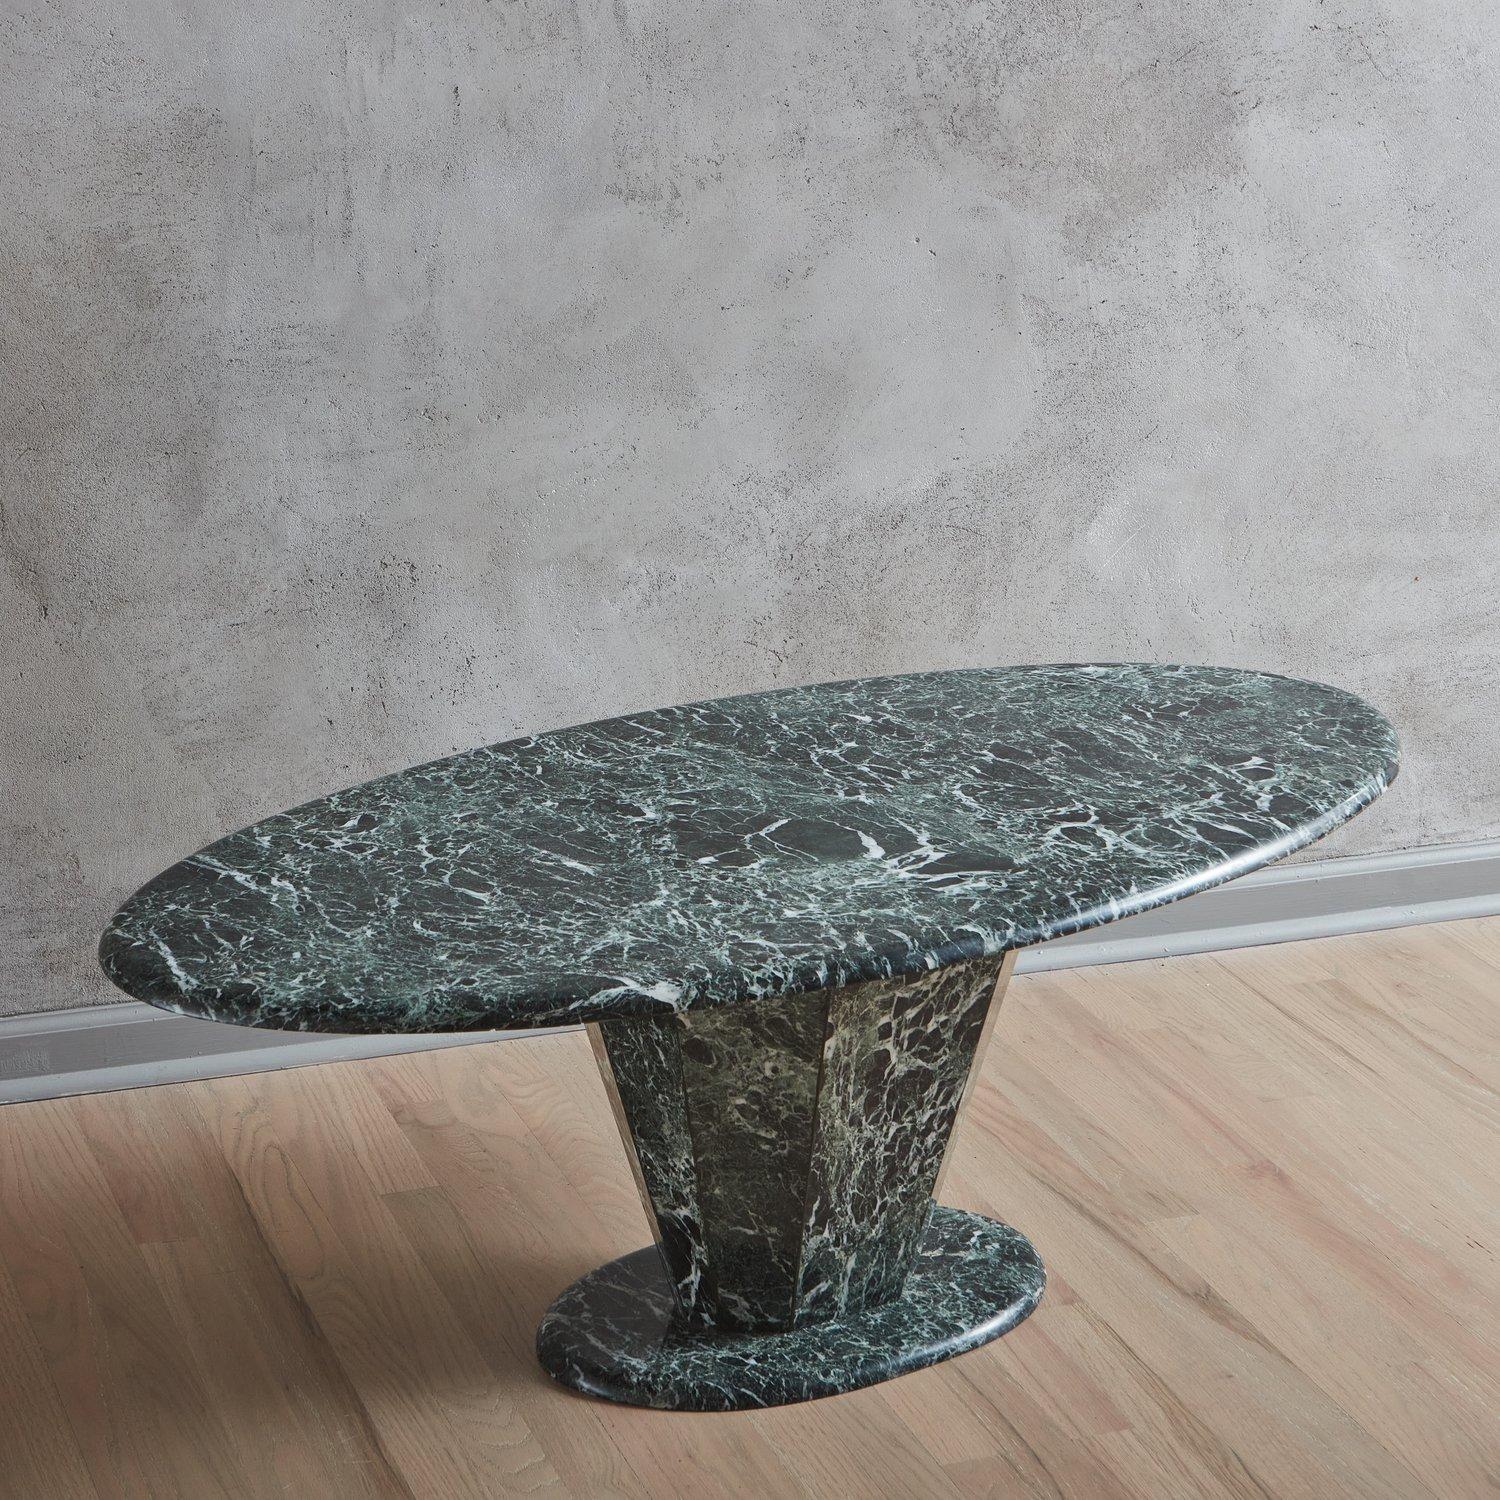 Italian Verde Marble Coffee Table with Tapered Pedestal Base, 20th Century For Sale